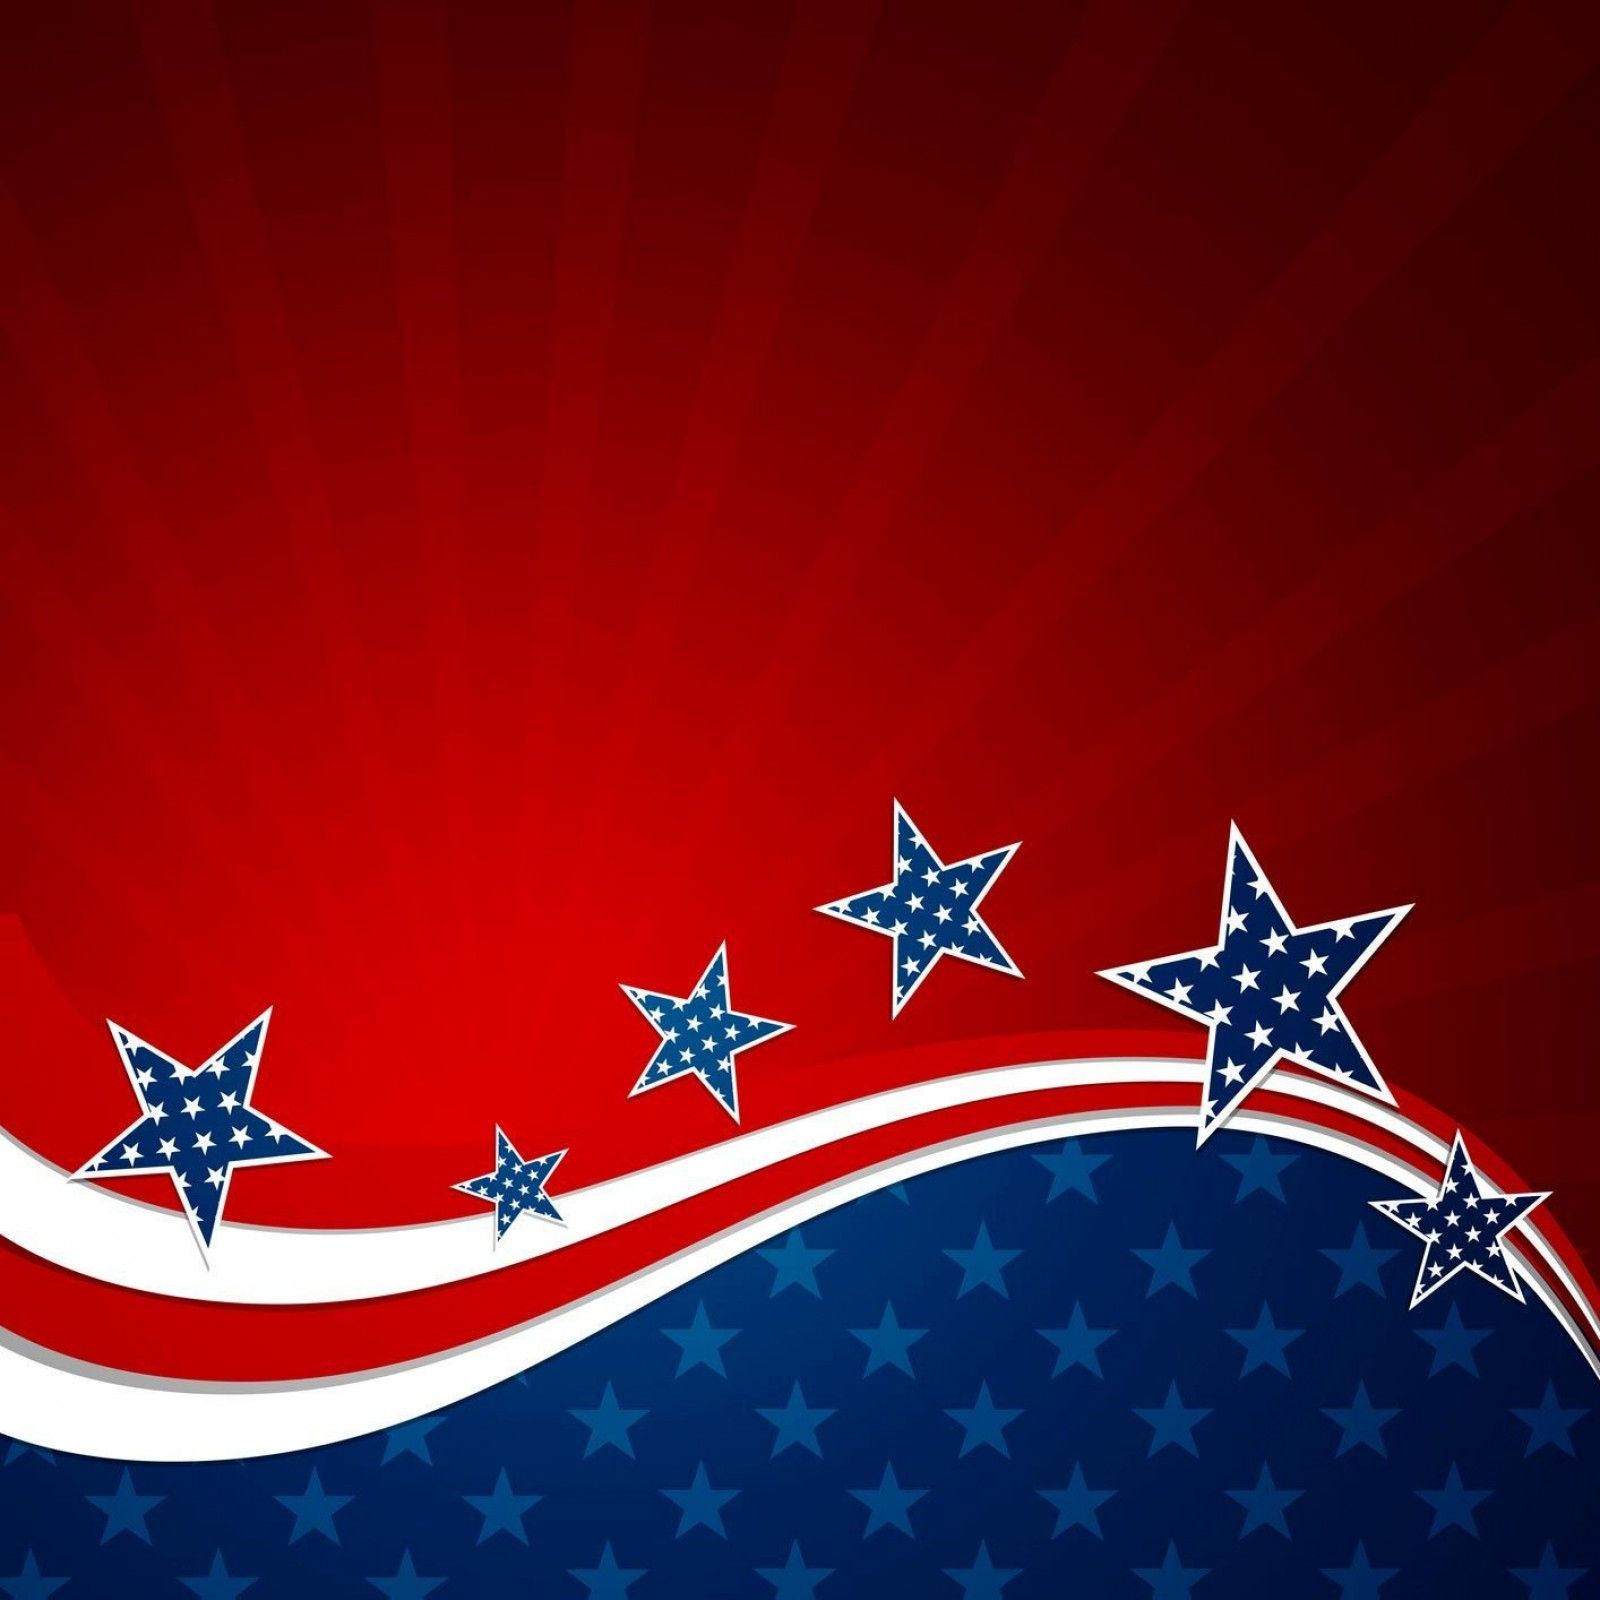 Wallpaper Suggestions - Free July 4th Background , HD Wallpaper & Backgrounds